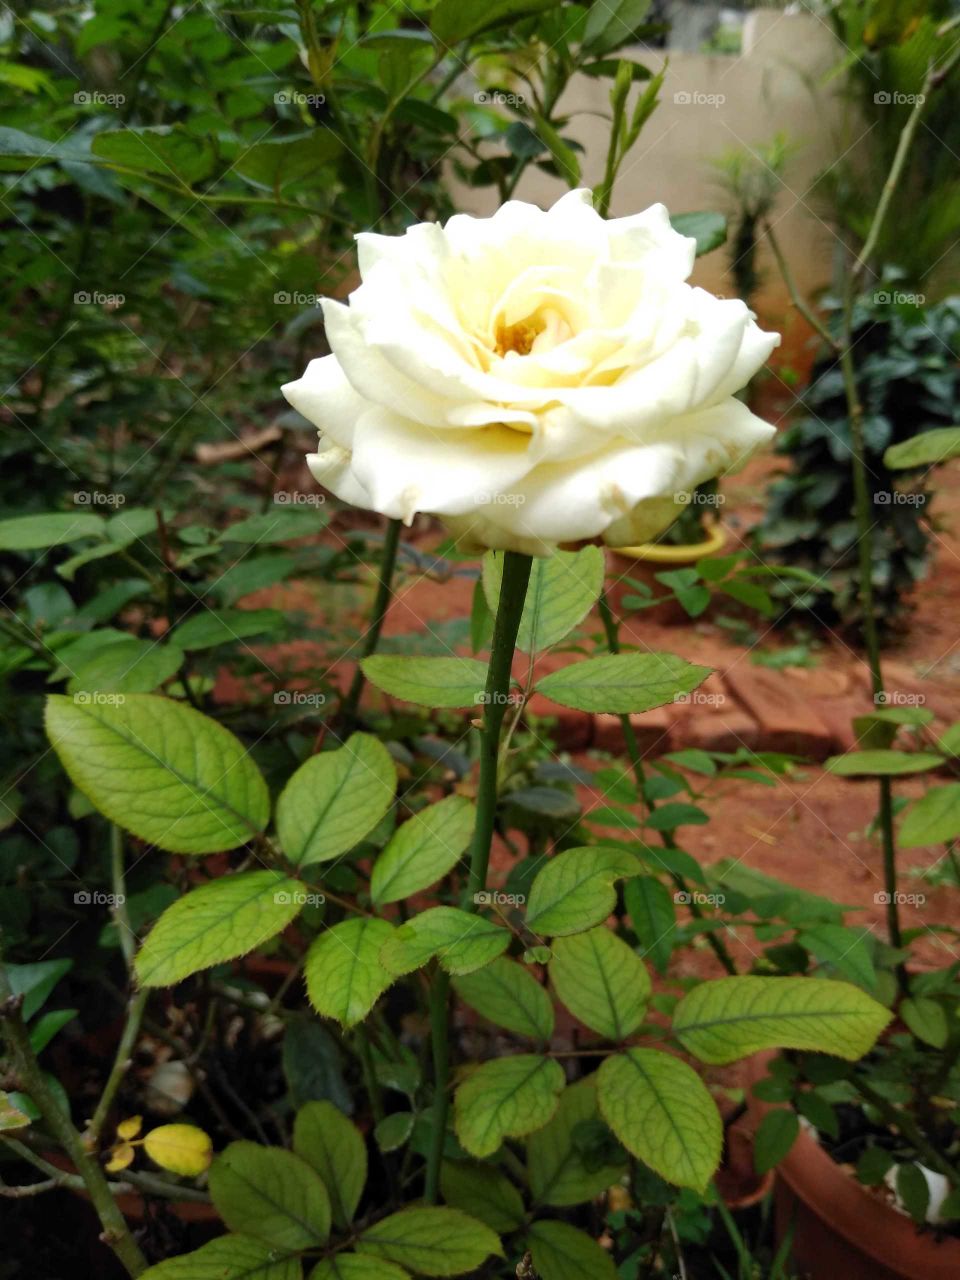 a beautiful white rose flower in the garden